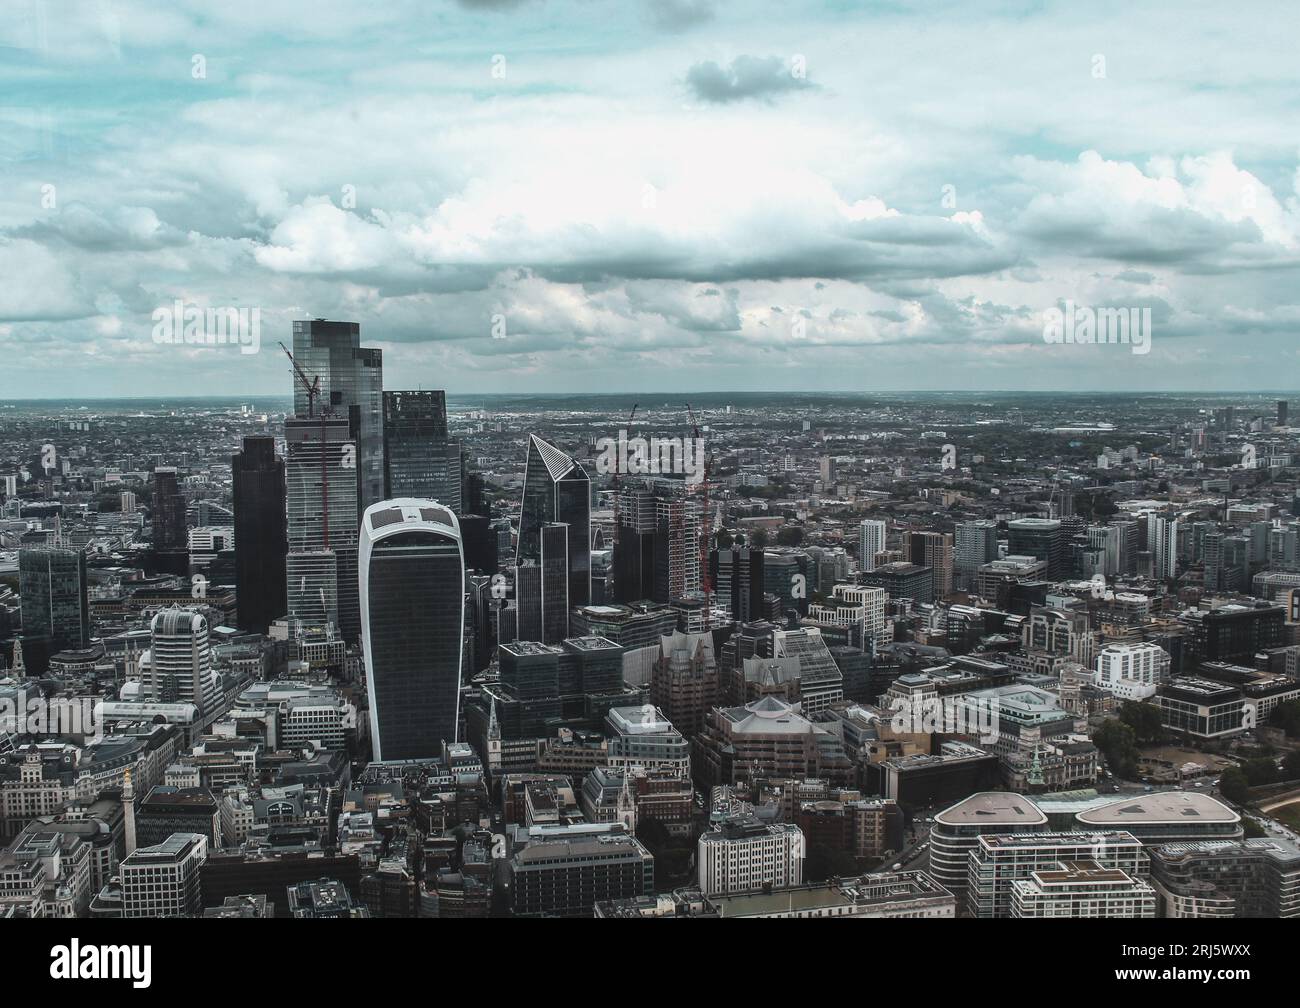 Aerial cityscape photo of London, UK, taken in overcast and moody weather conditions. Stock Photo